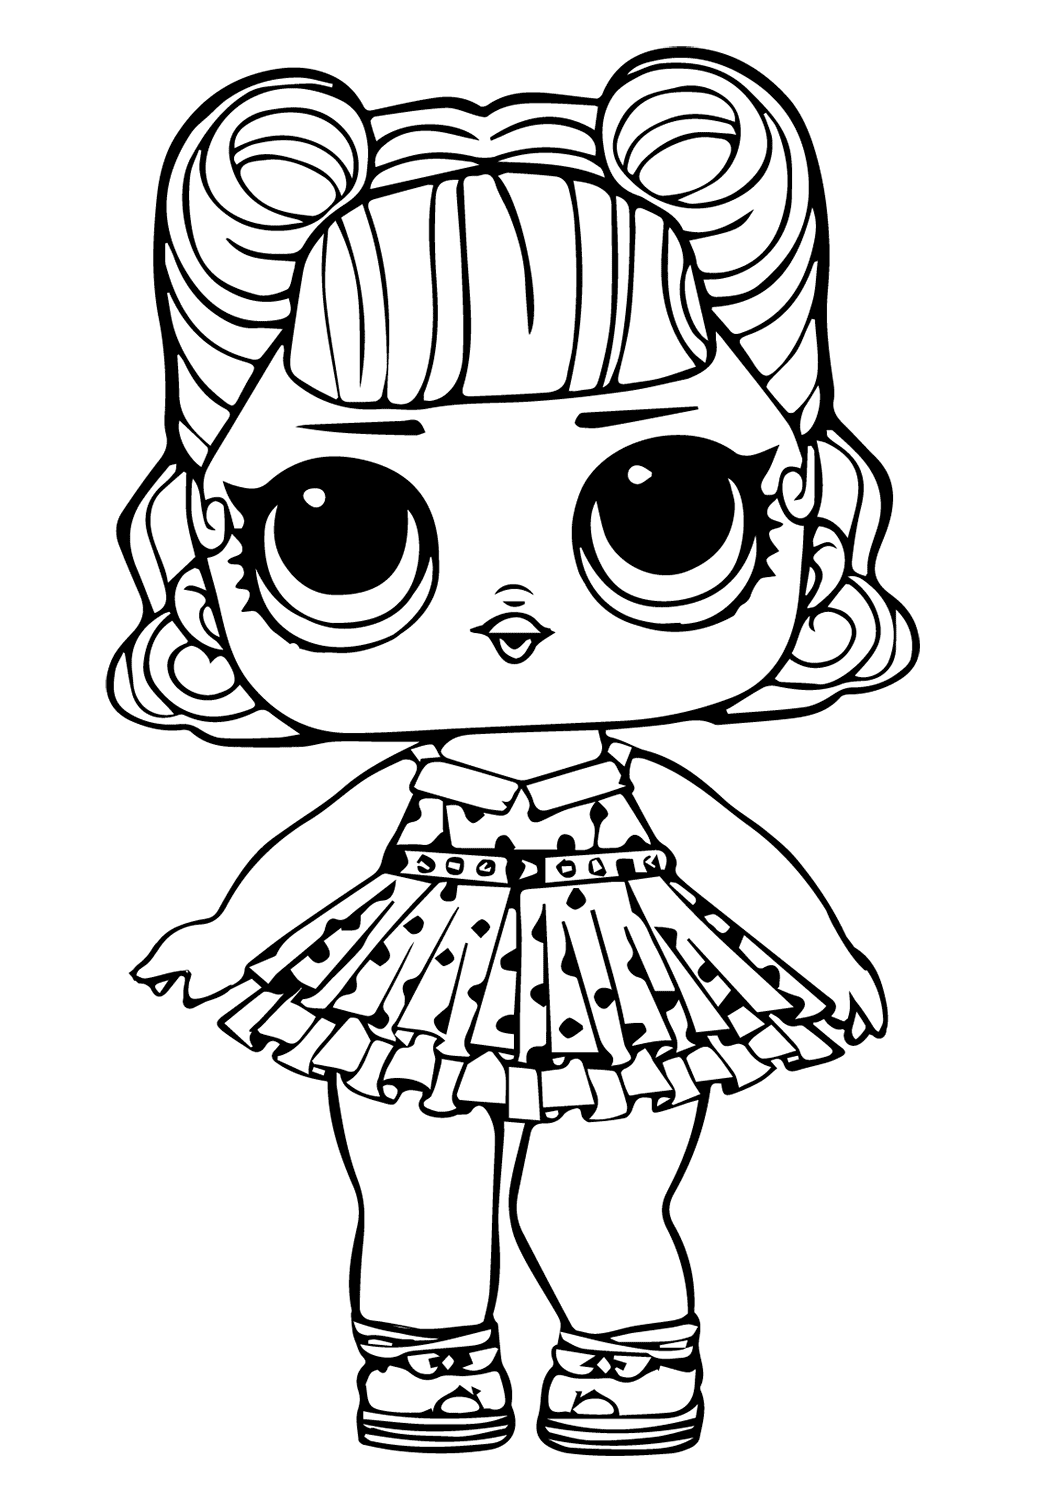 984 Simple Lol Doll Coloring Pages with disney character